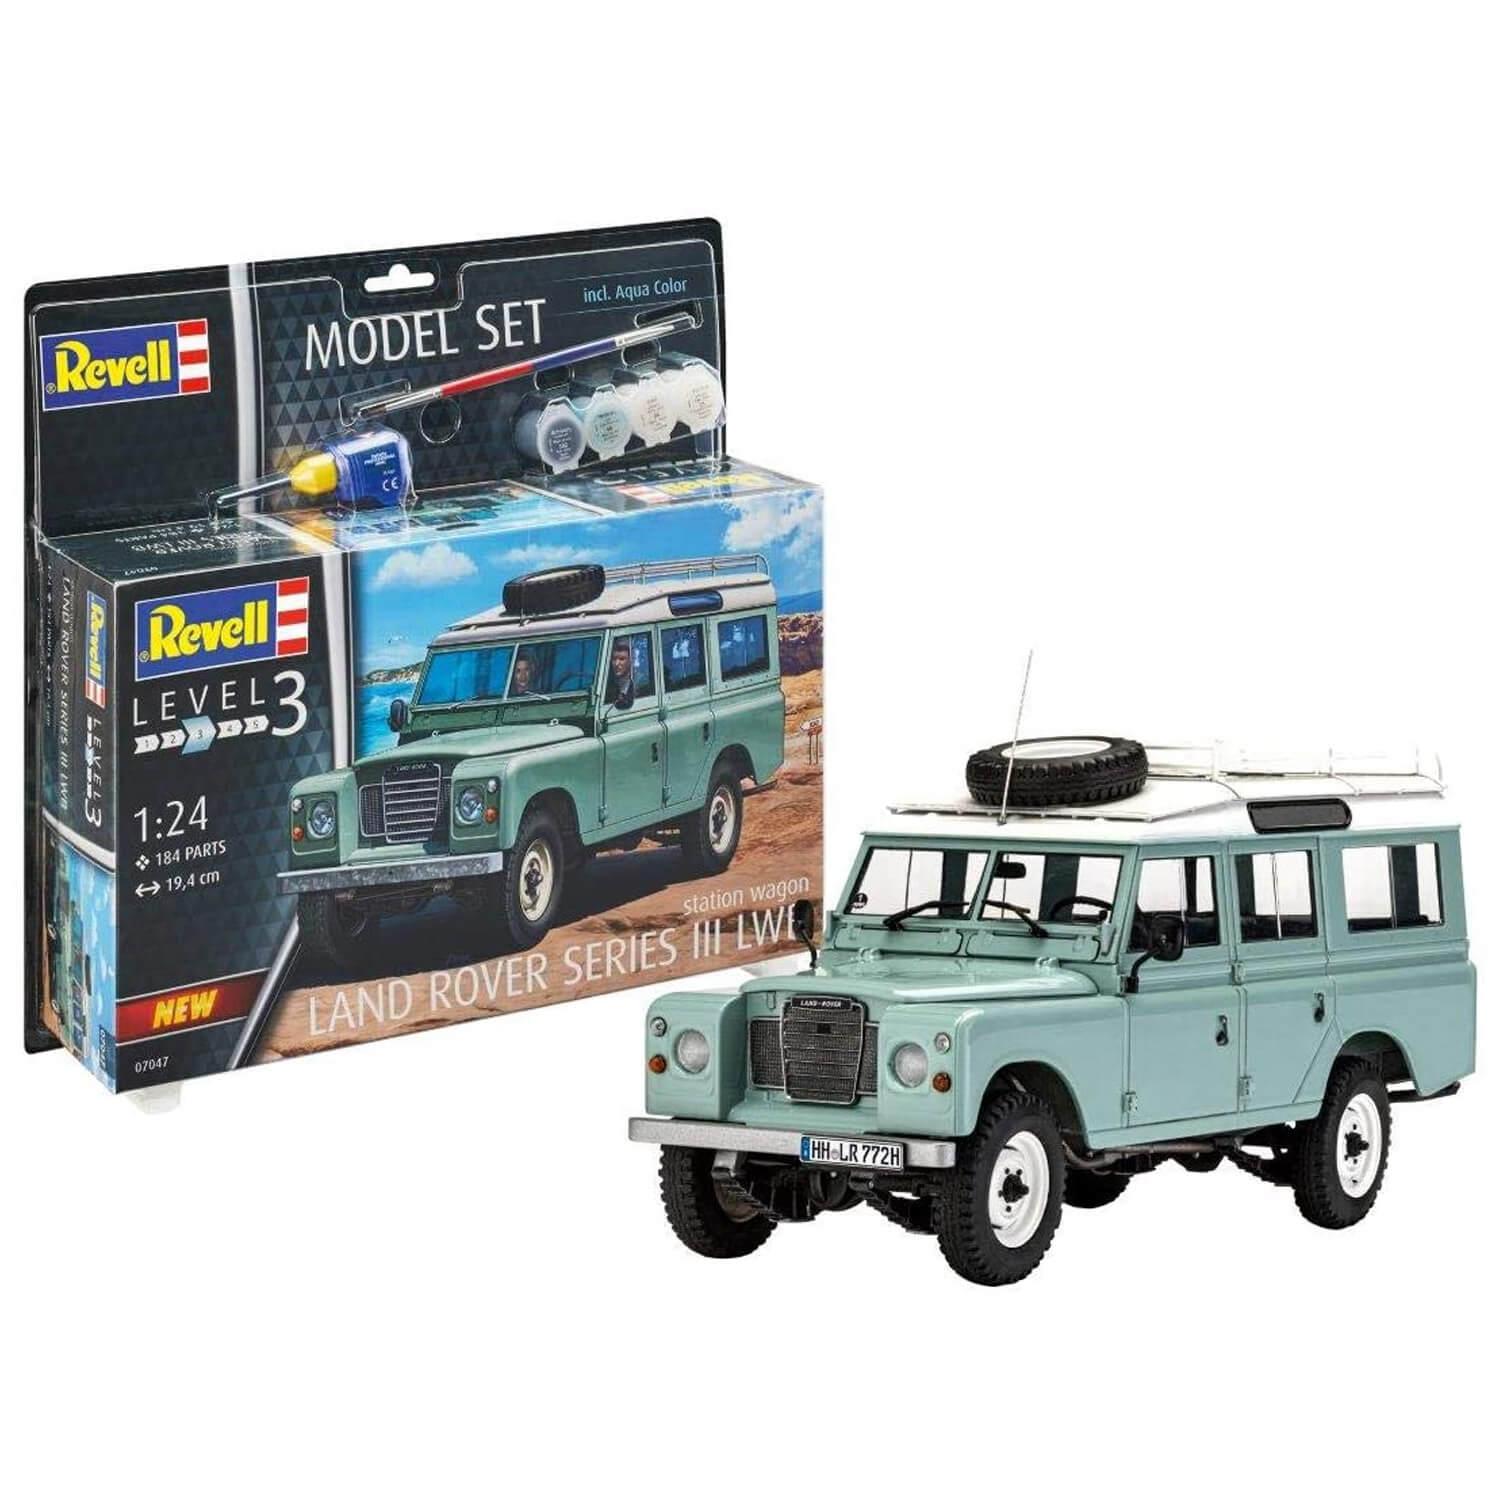 Maquette voiture : Model Set : Land Rover Series III